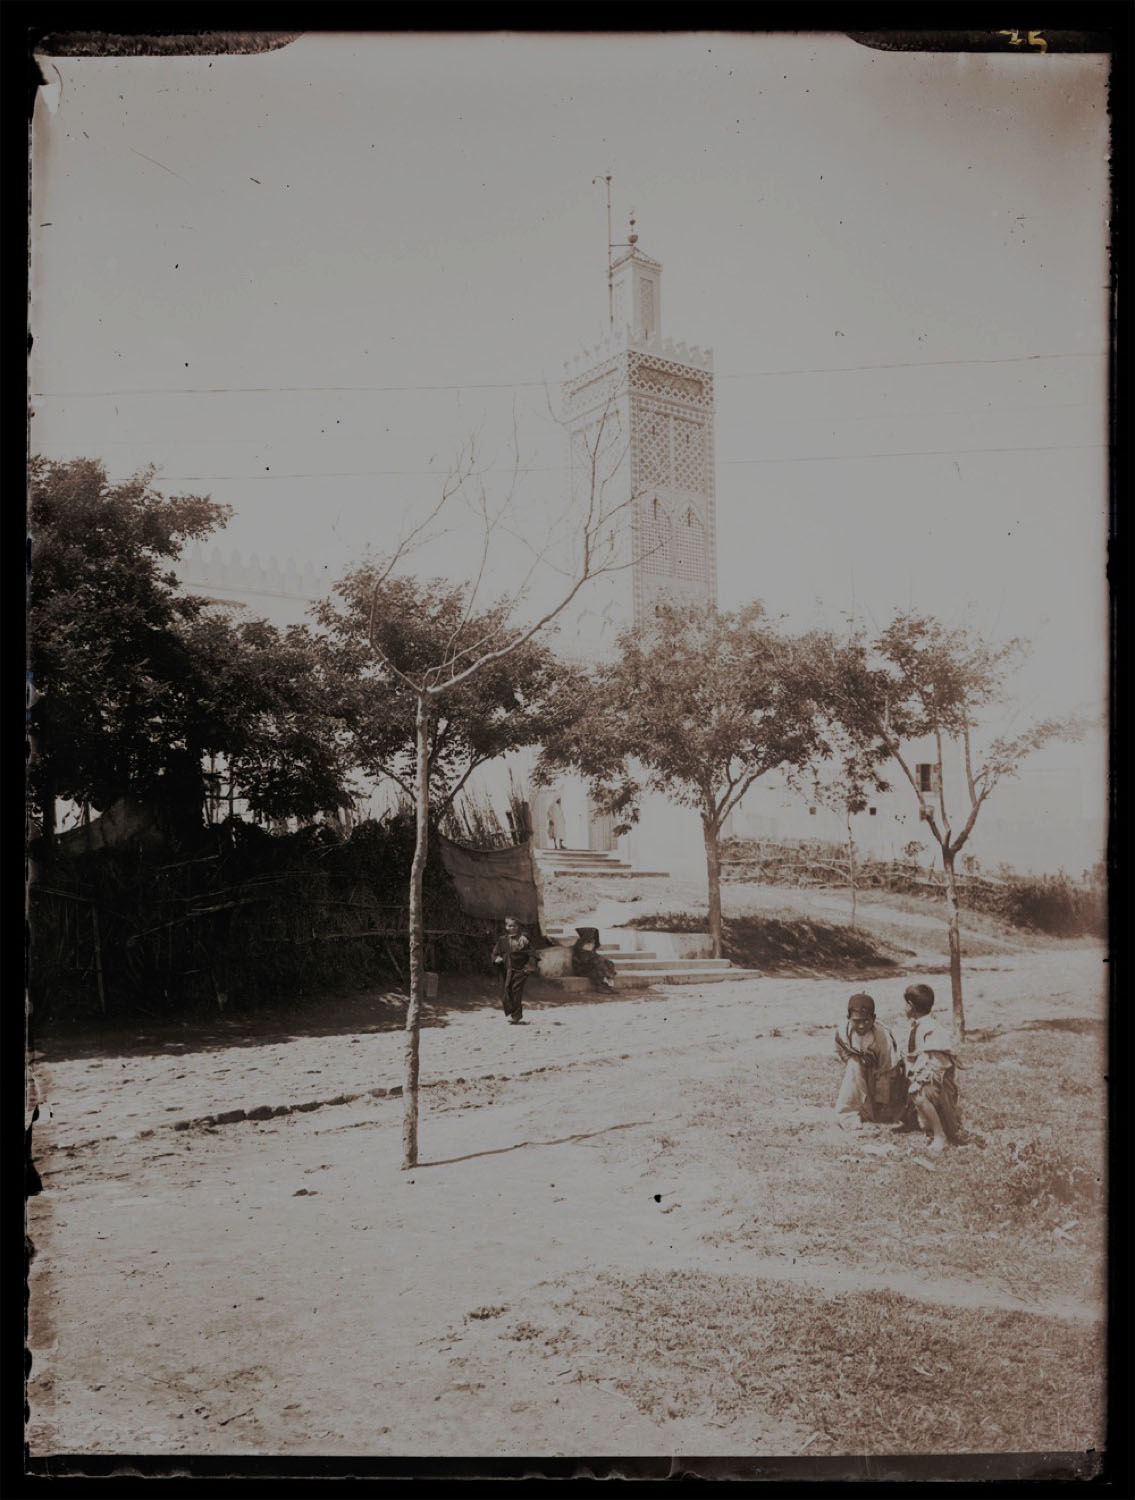 Distant view of the minaret from a field, children playing nearby